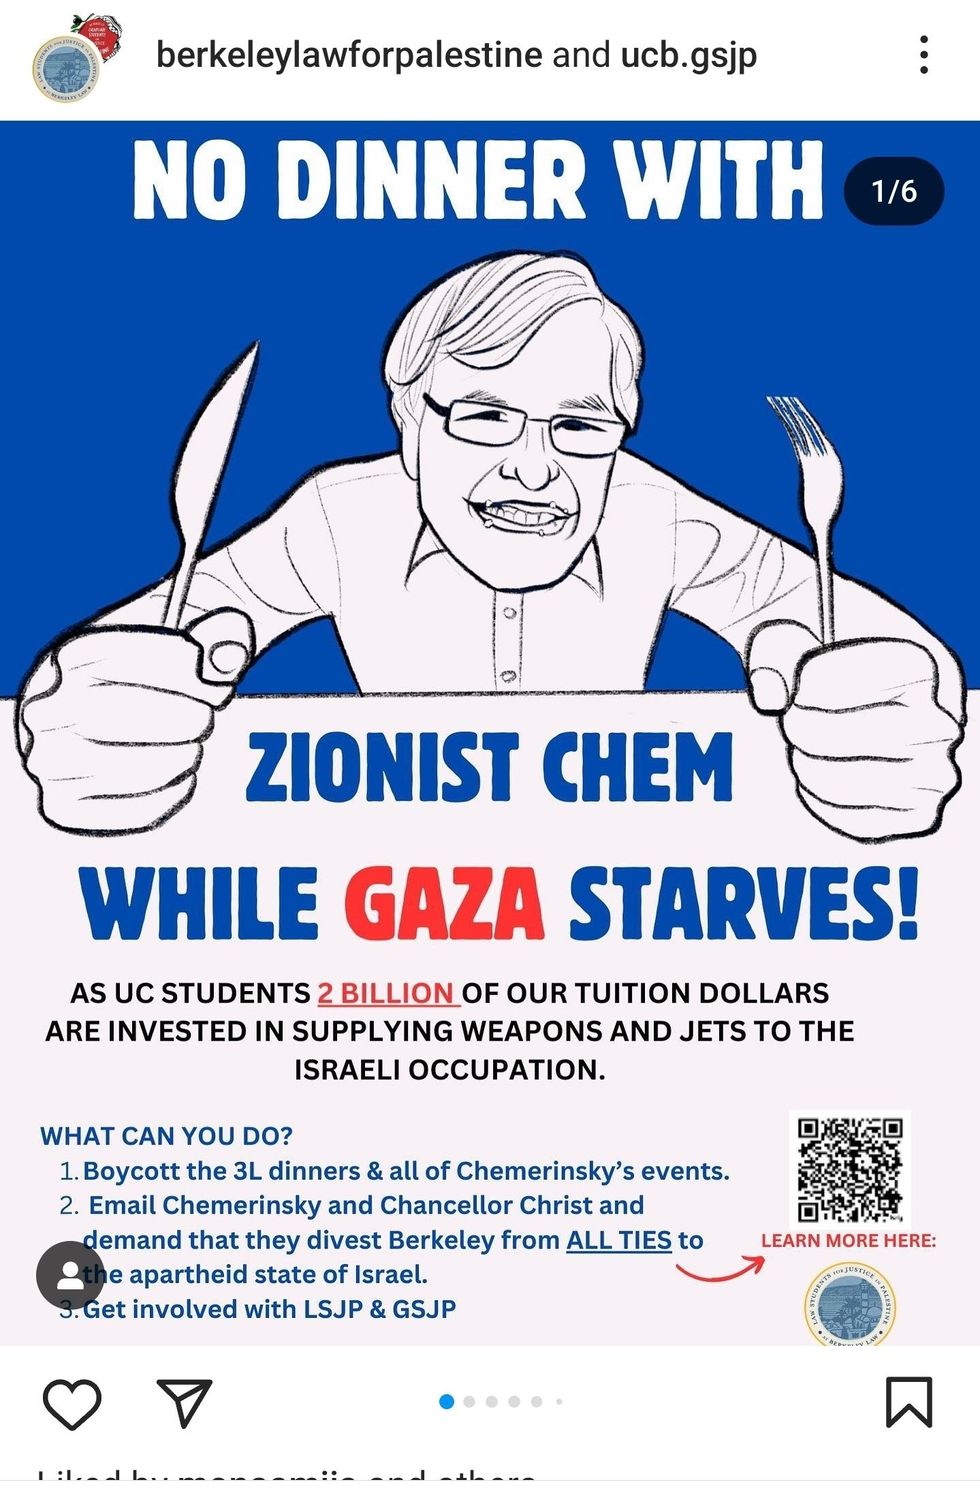 An image of the social media cartoon calling for students to boycott the dinner